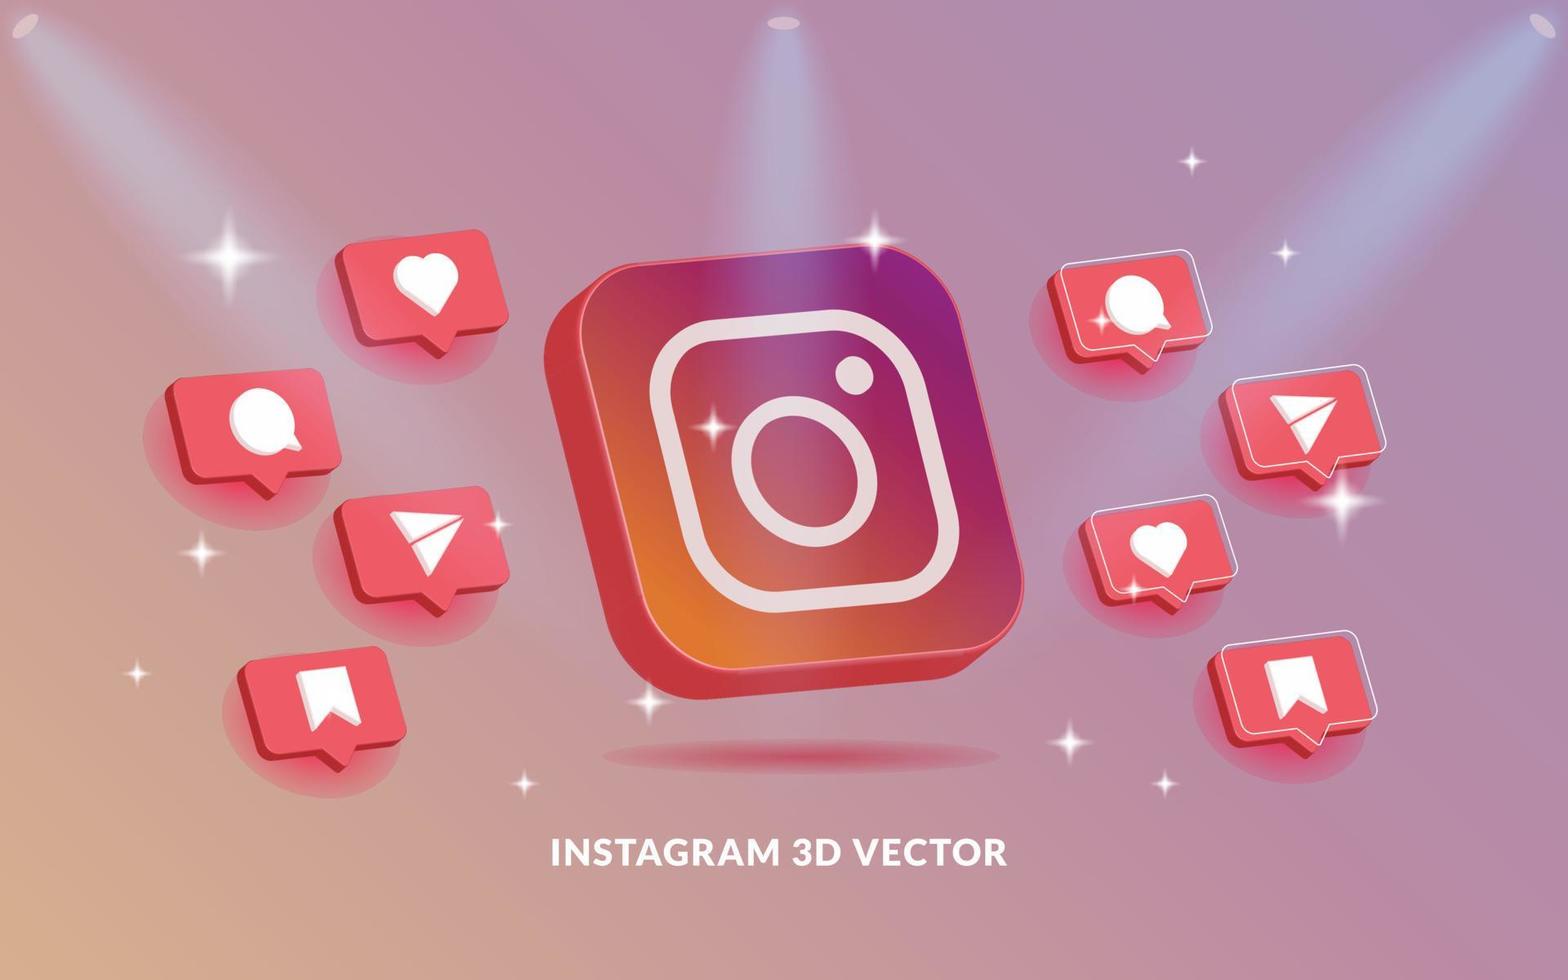 Instagram logo and icon set in 3d vector style